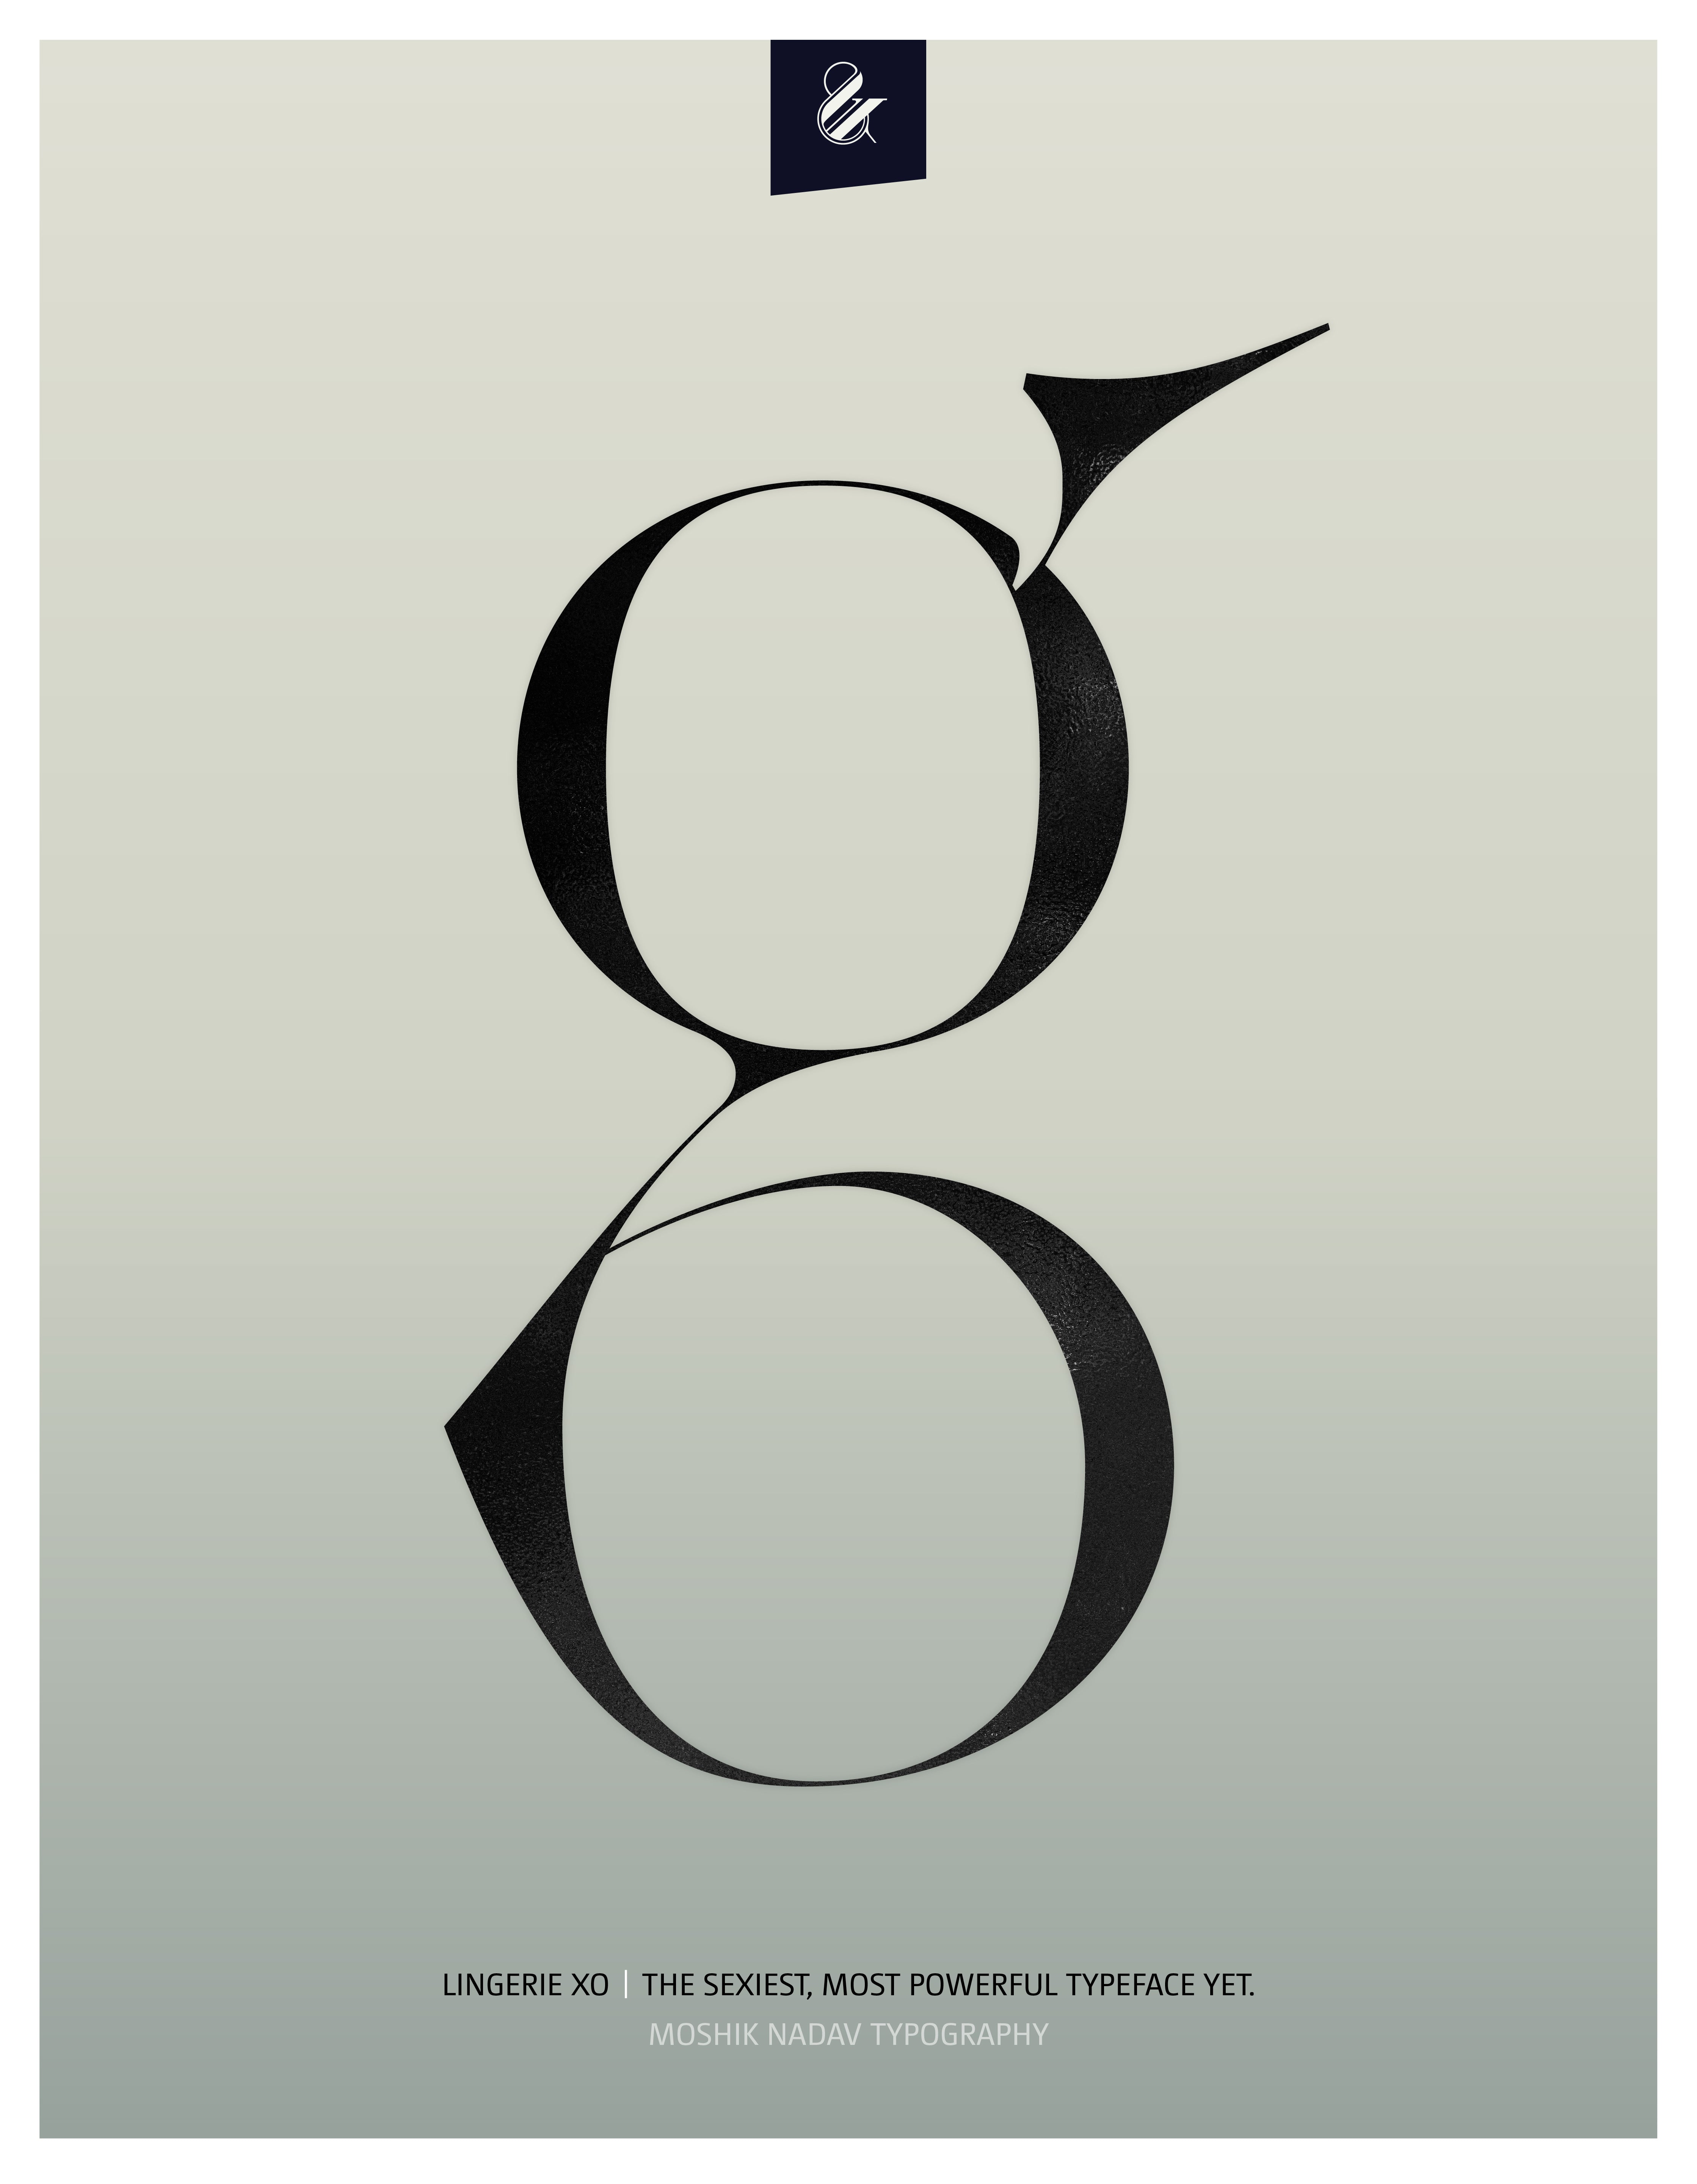 Super Sexy lowercase g Poster - Designed with the sexy font Lingerie XO by Moshik Nadav Fashion Typography NYC